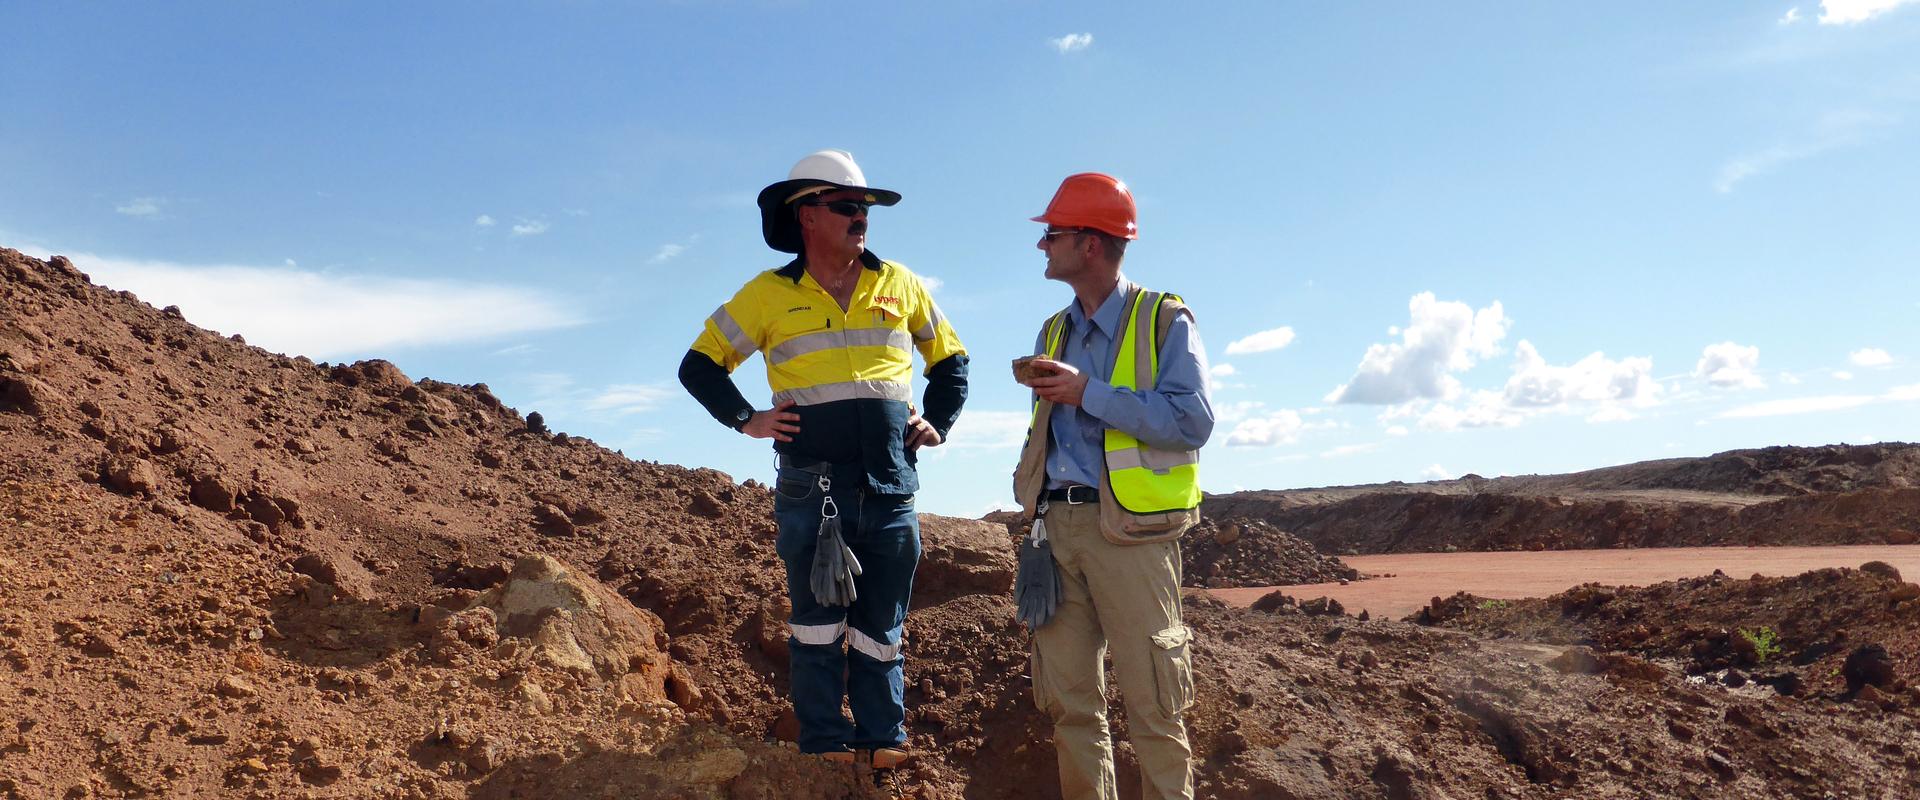 Sampling of rare-earth enriched ore from the Mount Weld mine, Australia